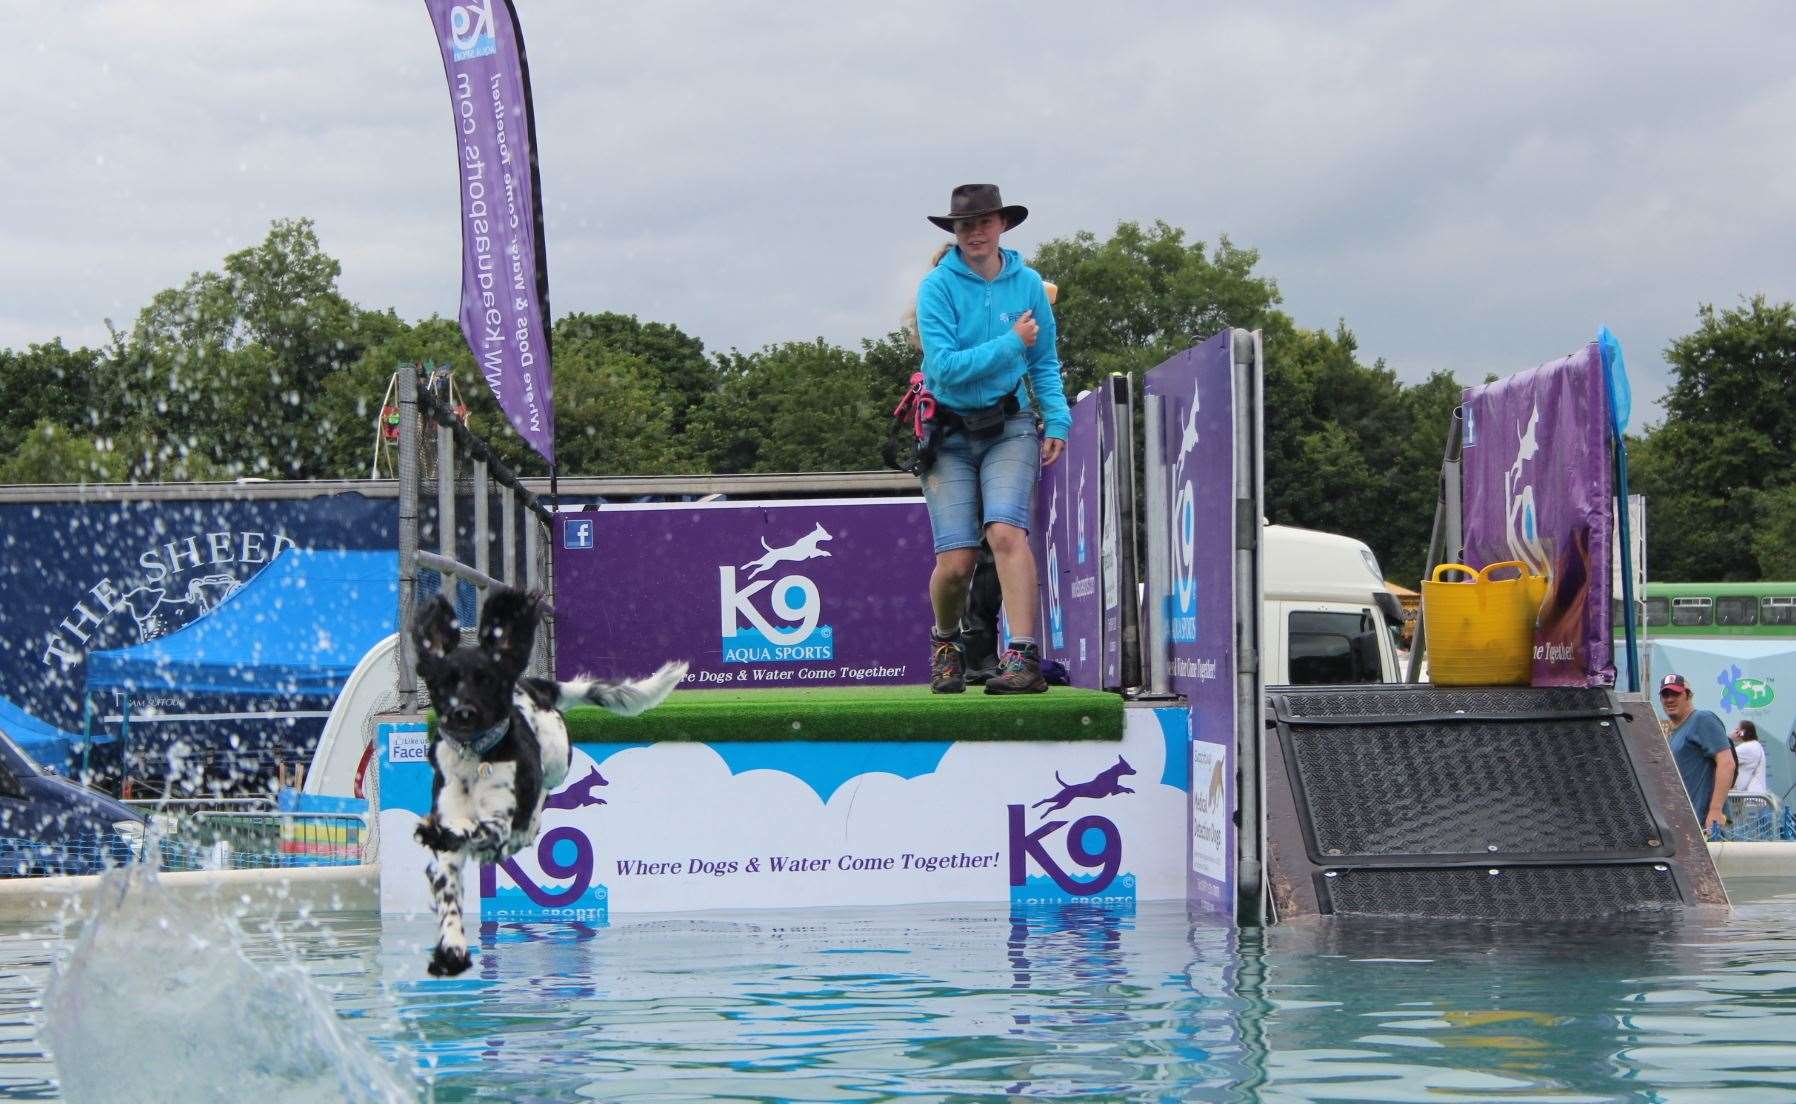 Diving dogs from K9 Aqua Sports at last year's Kent County Show near Maidstone